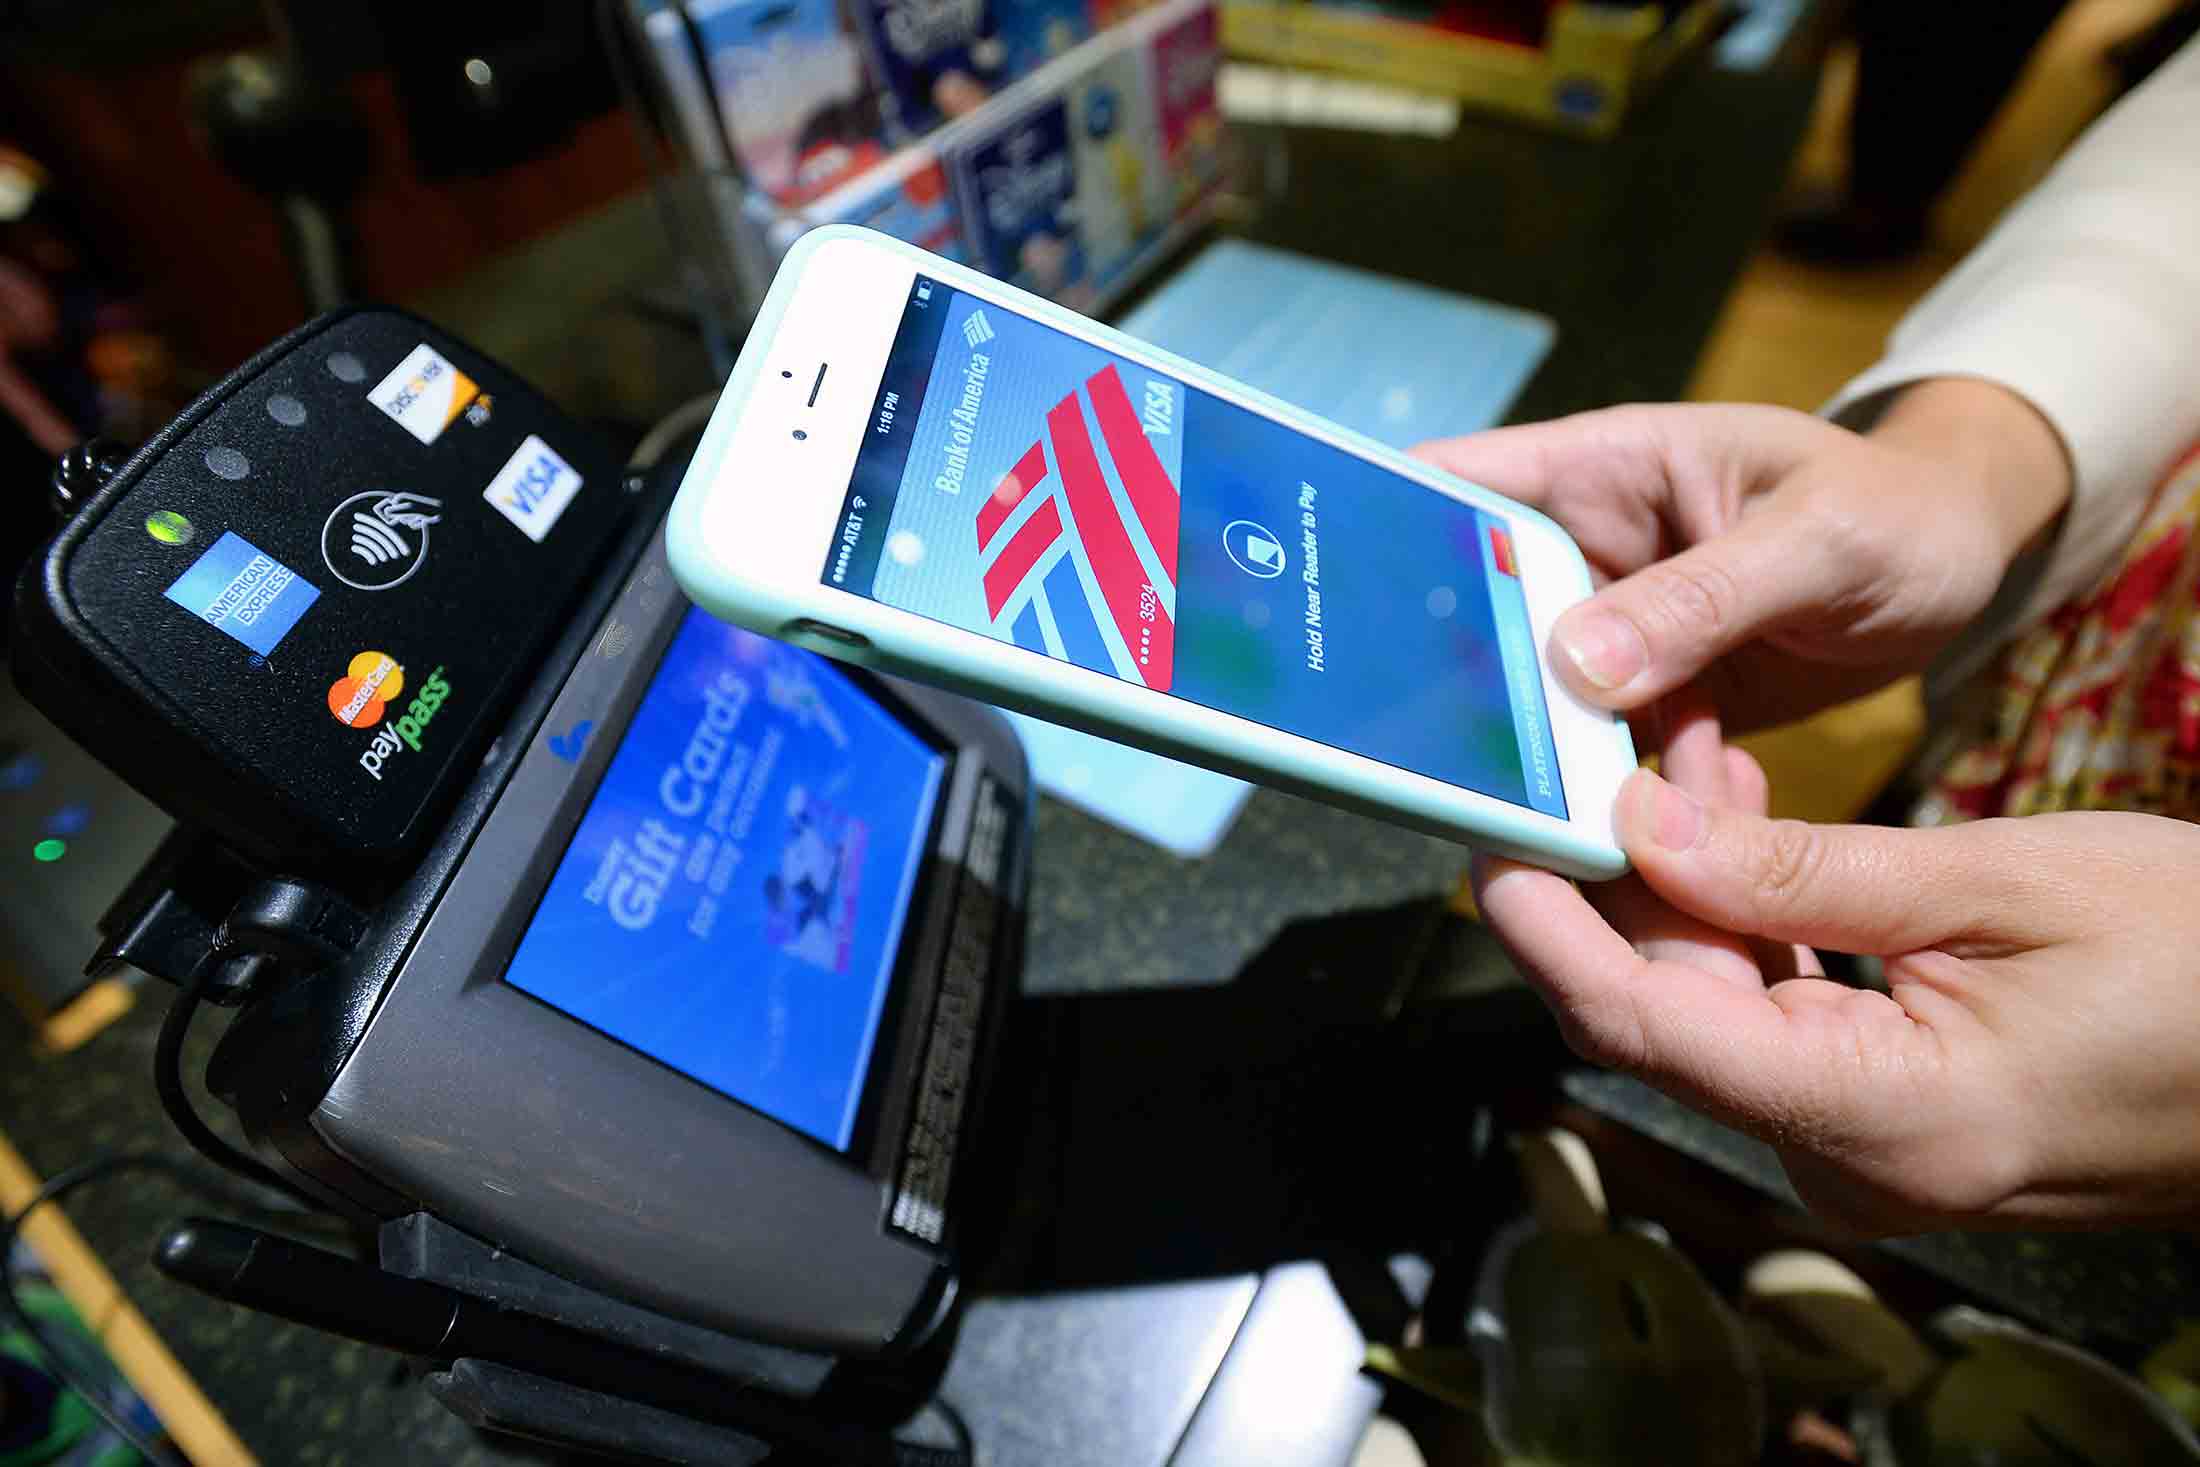 A customer uses Apple Pay at a Disney store in Glendale, Calif.
